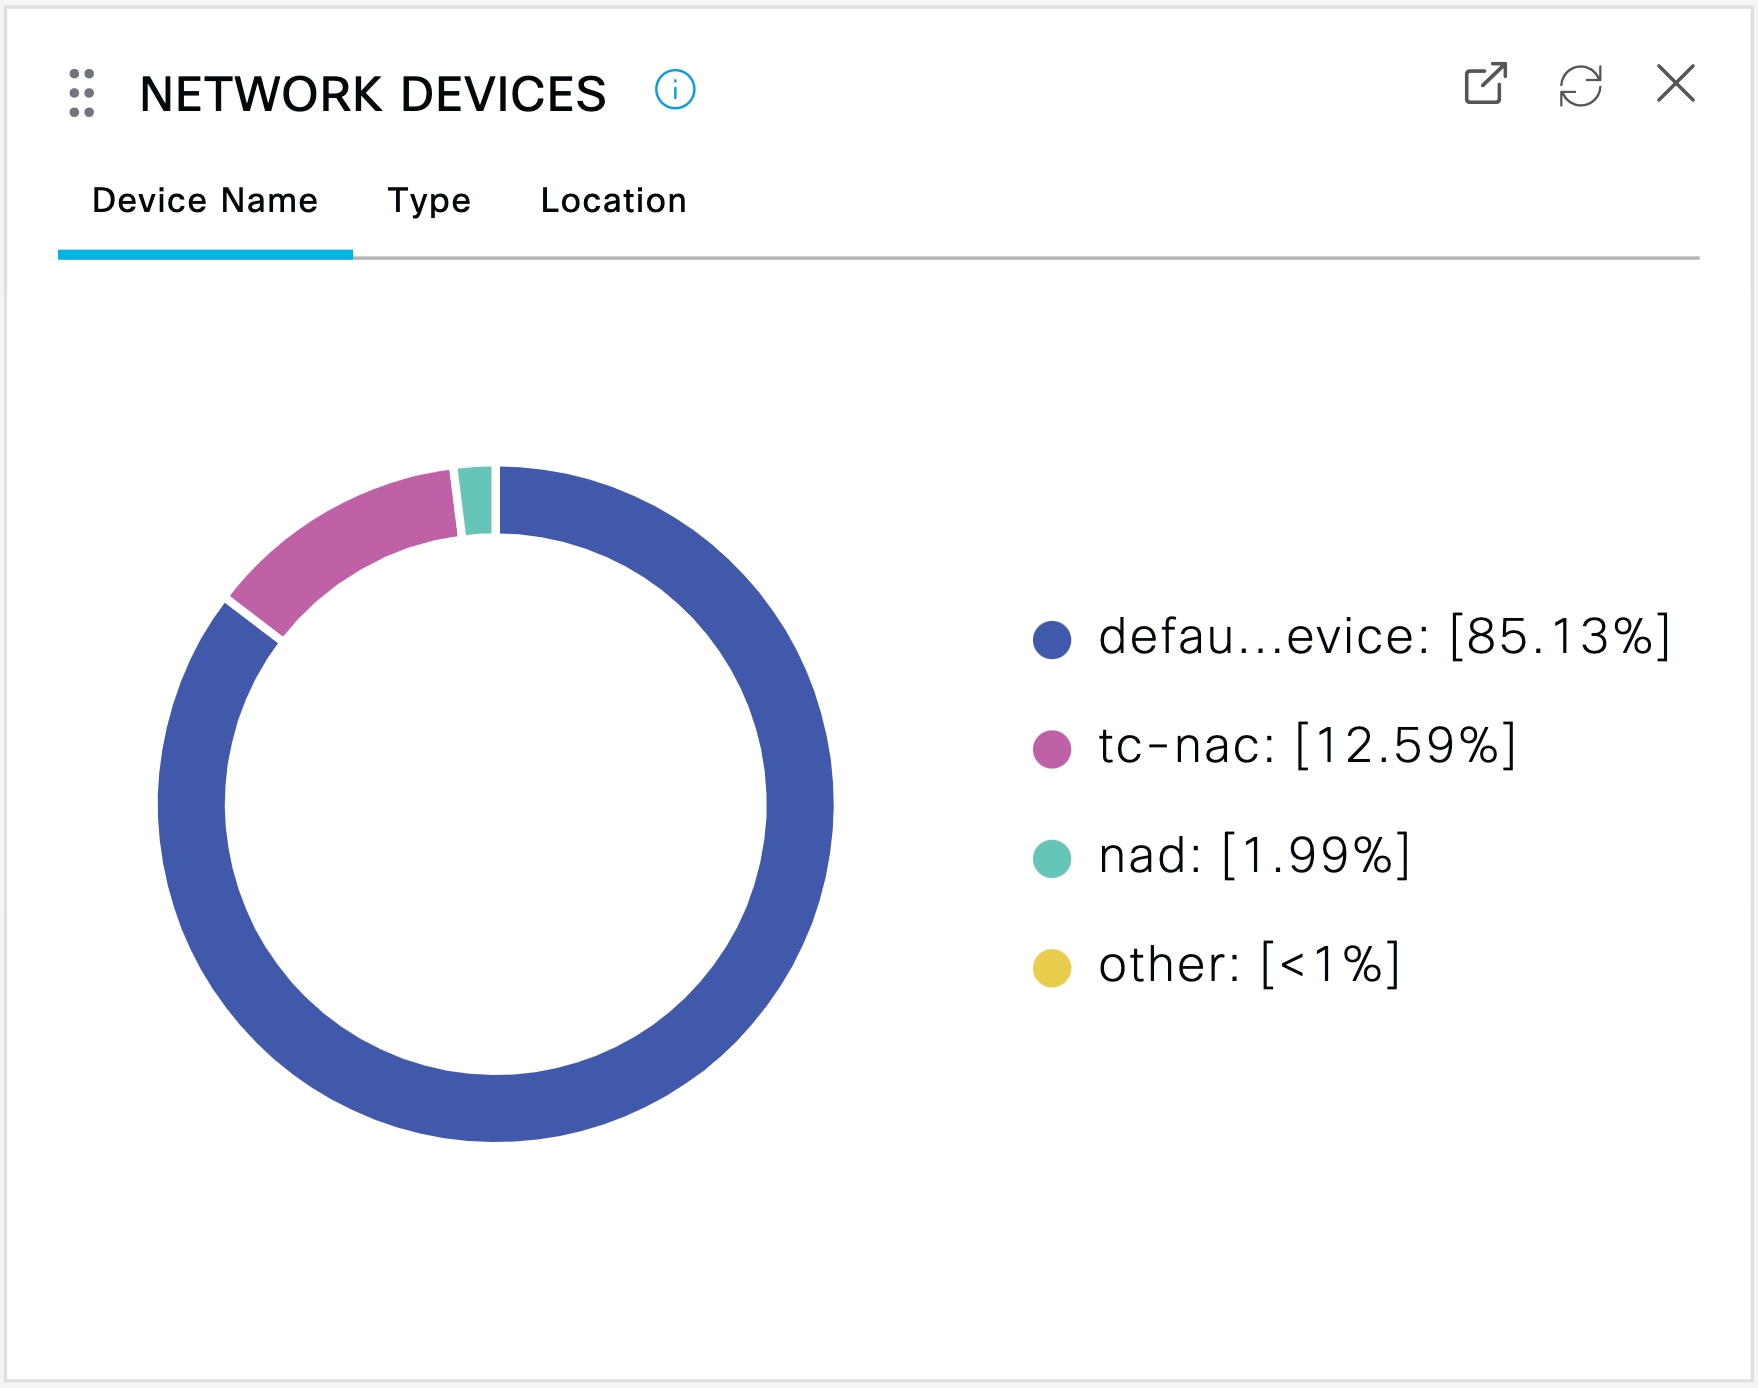 Network devices - Device Name